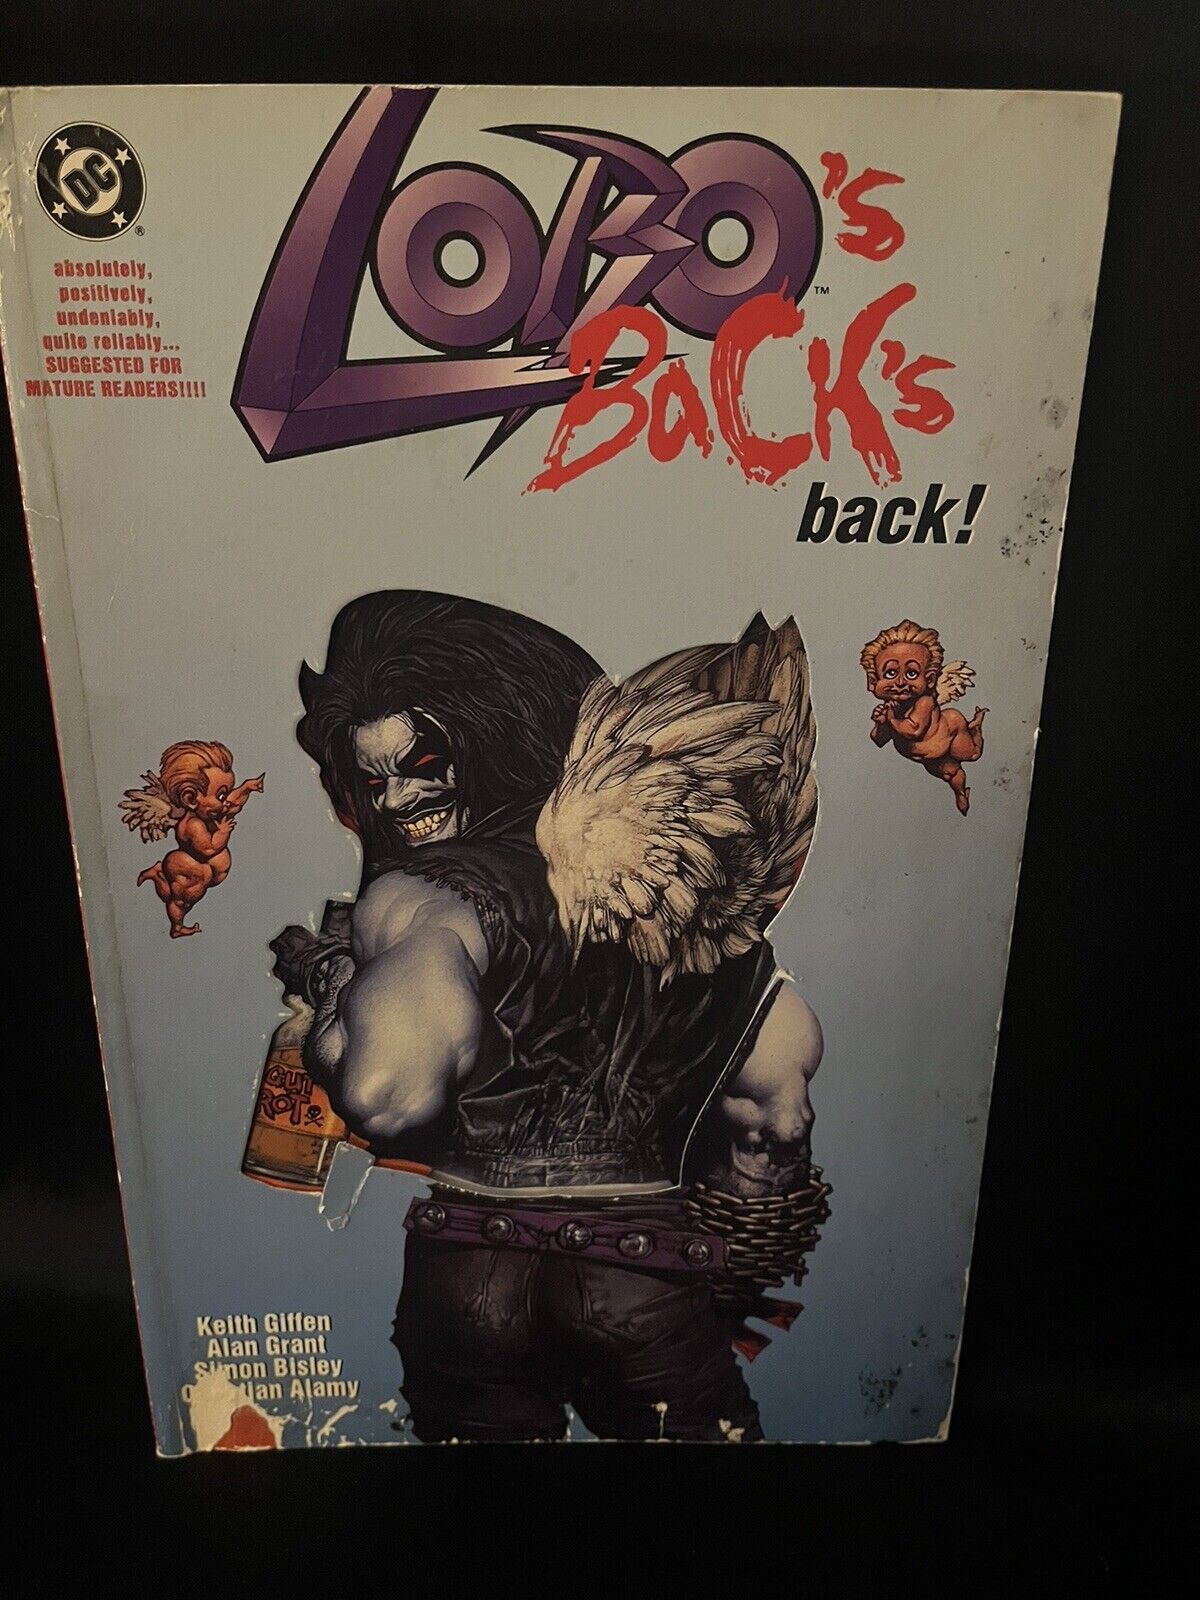 DC COMICS LOBO'S Back's BACK Softcover TPB Giffen Bisley 1st Print Die-Cut Cover